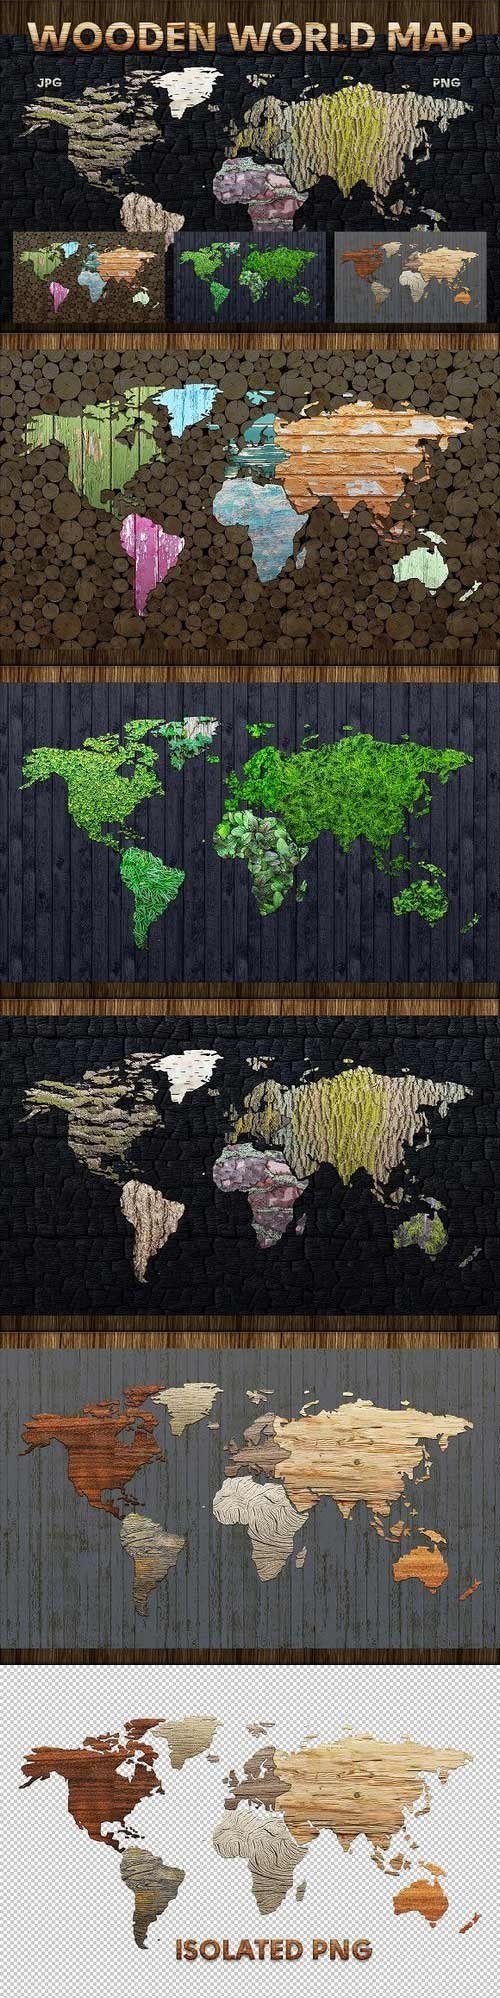 Wooden World Map Extended License 1285039